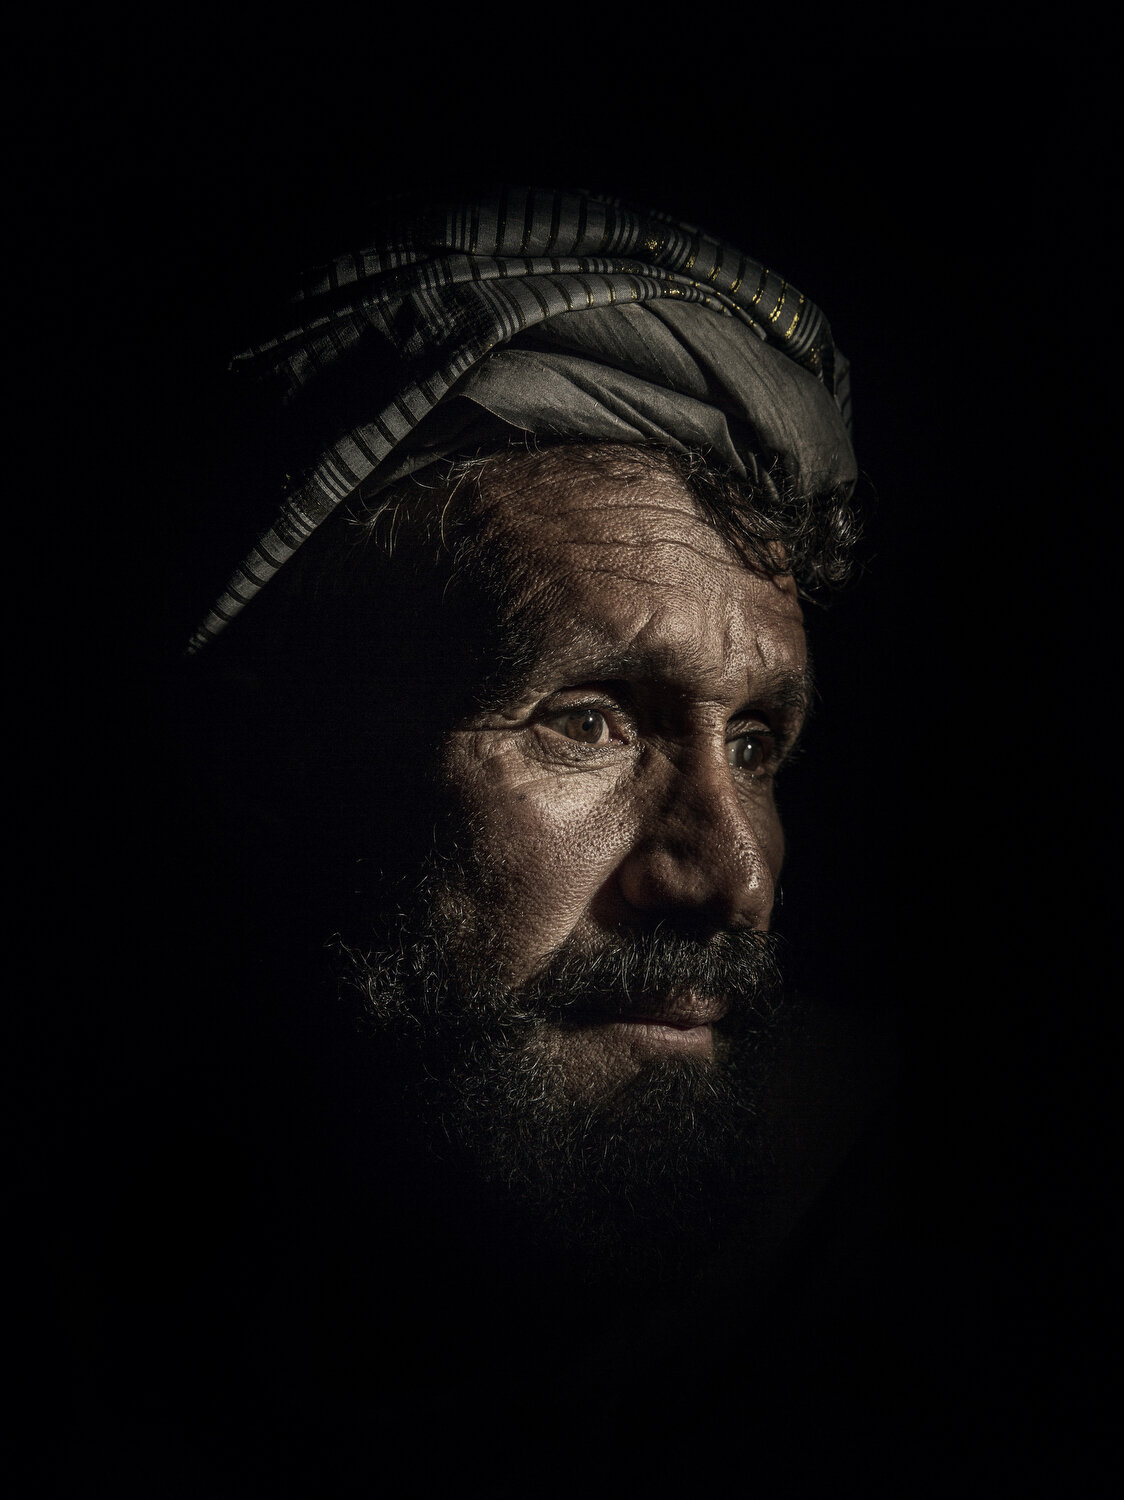  Sher Muhammad, age 40, from Helmand Province. He moved to an IDP camp in Kabul in 2009 after fighting affected his ability to farm, Afghanistan, 2016. 